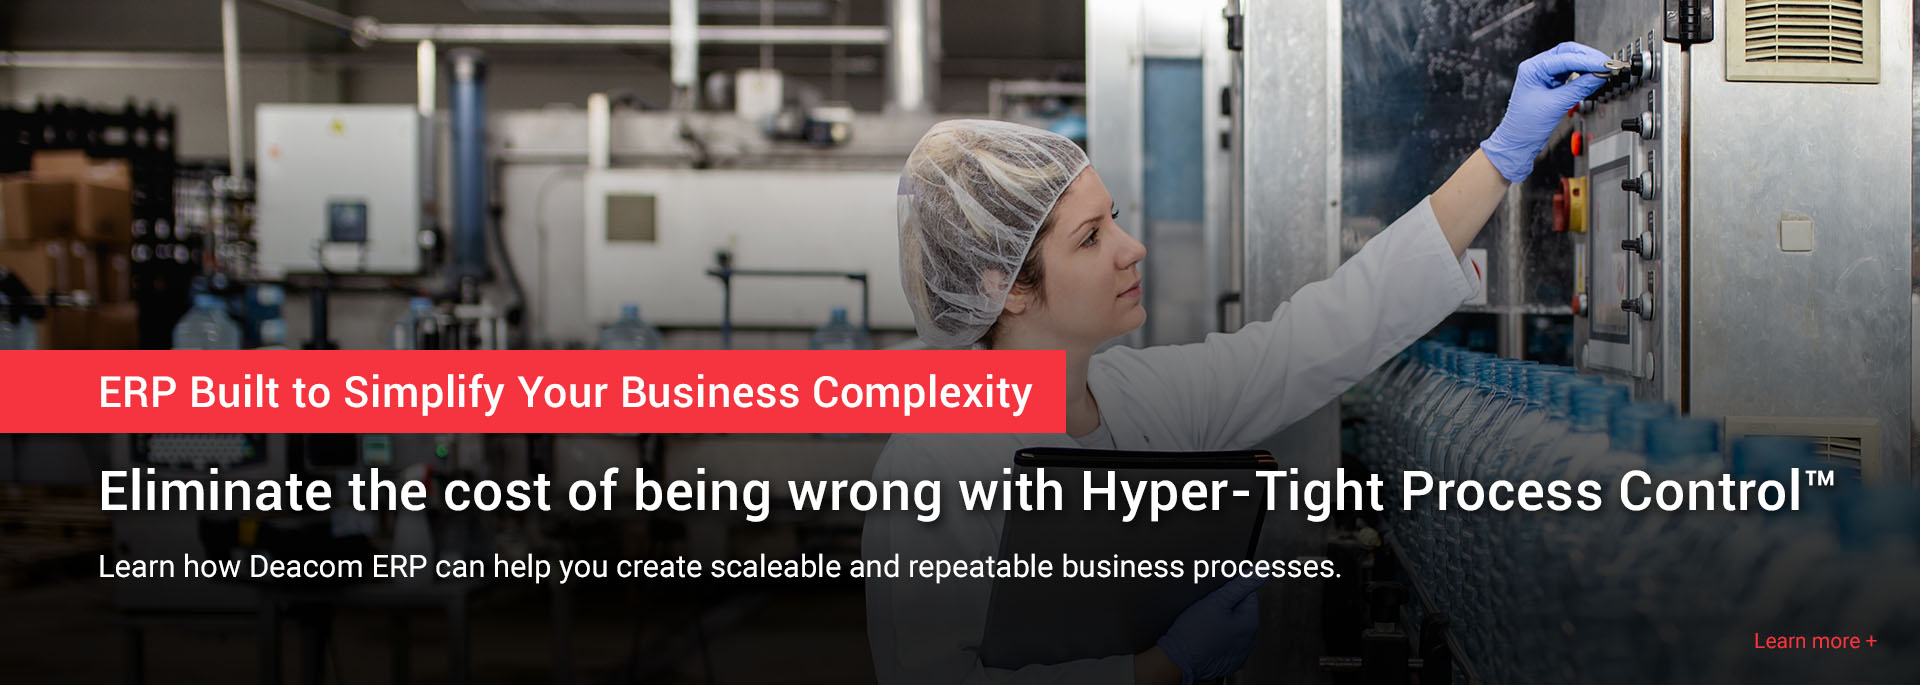 Hyper-Tight Process Control™ with Deacom ERP